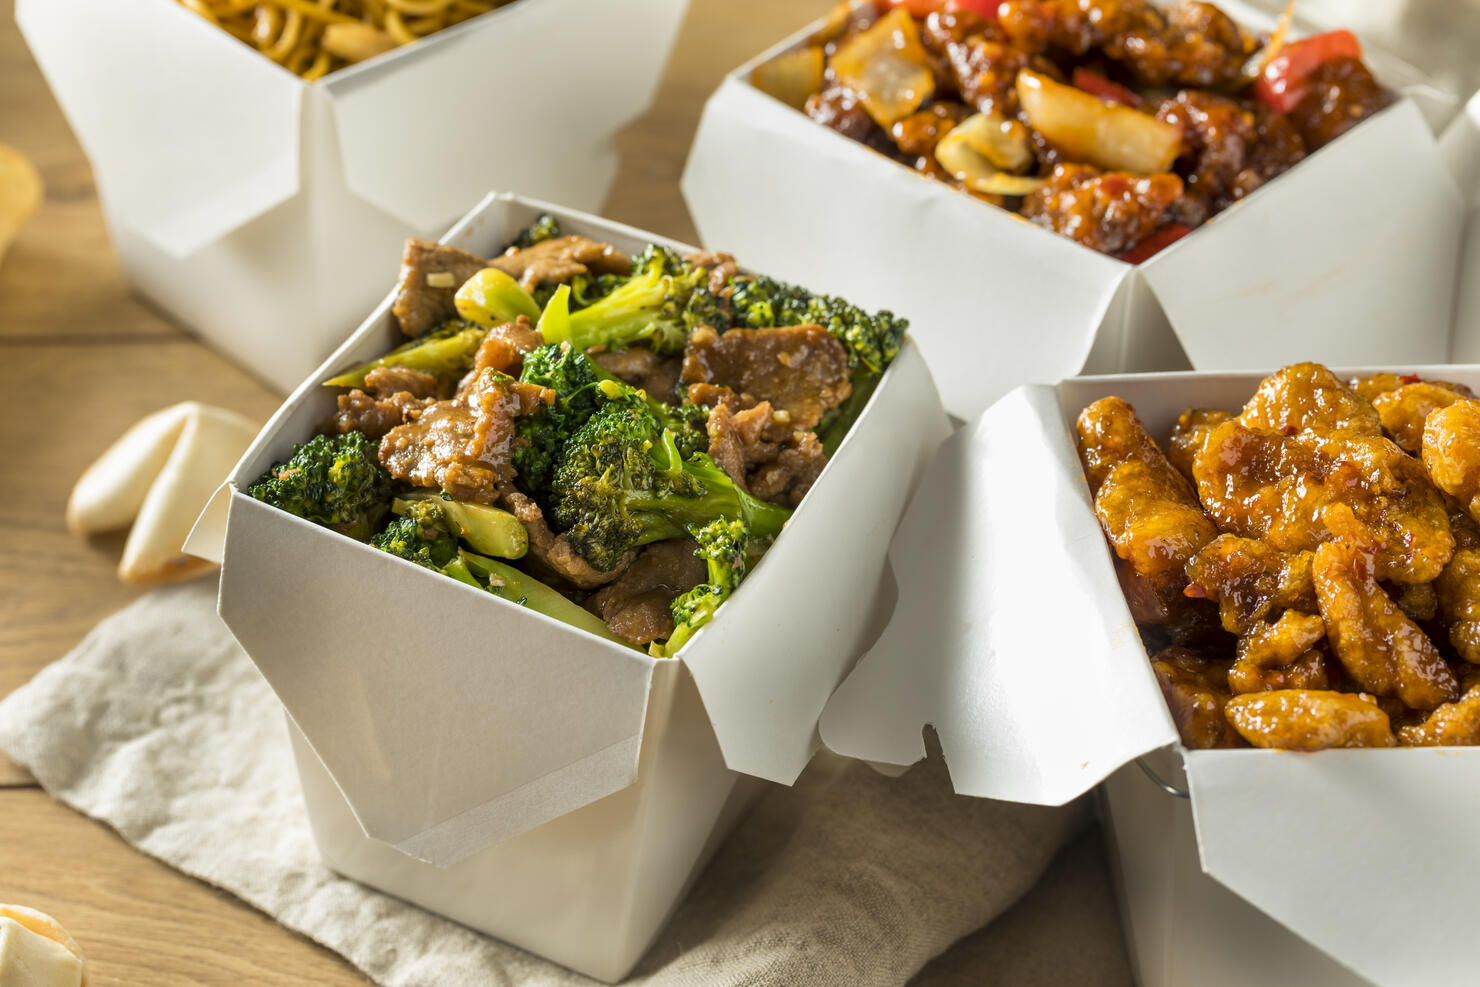 Spicy Chinese Take Out Food